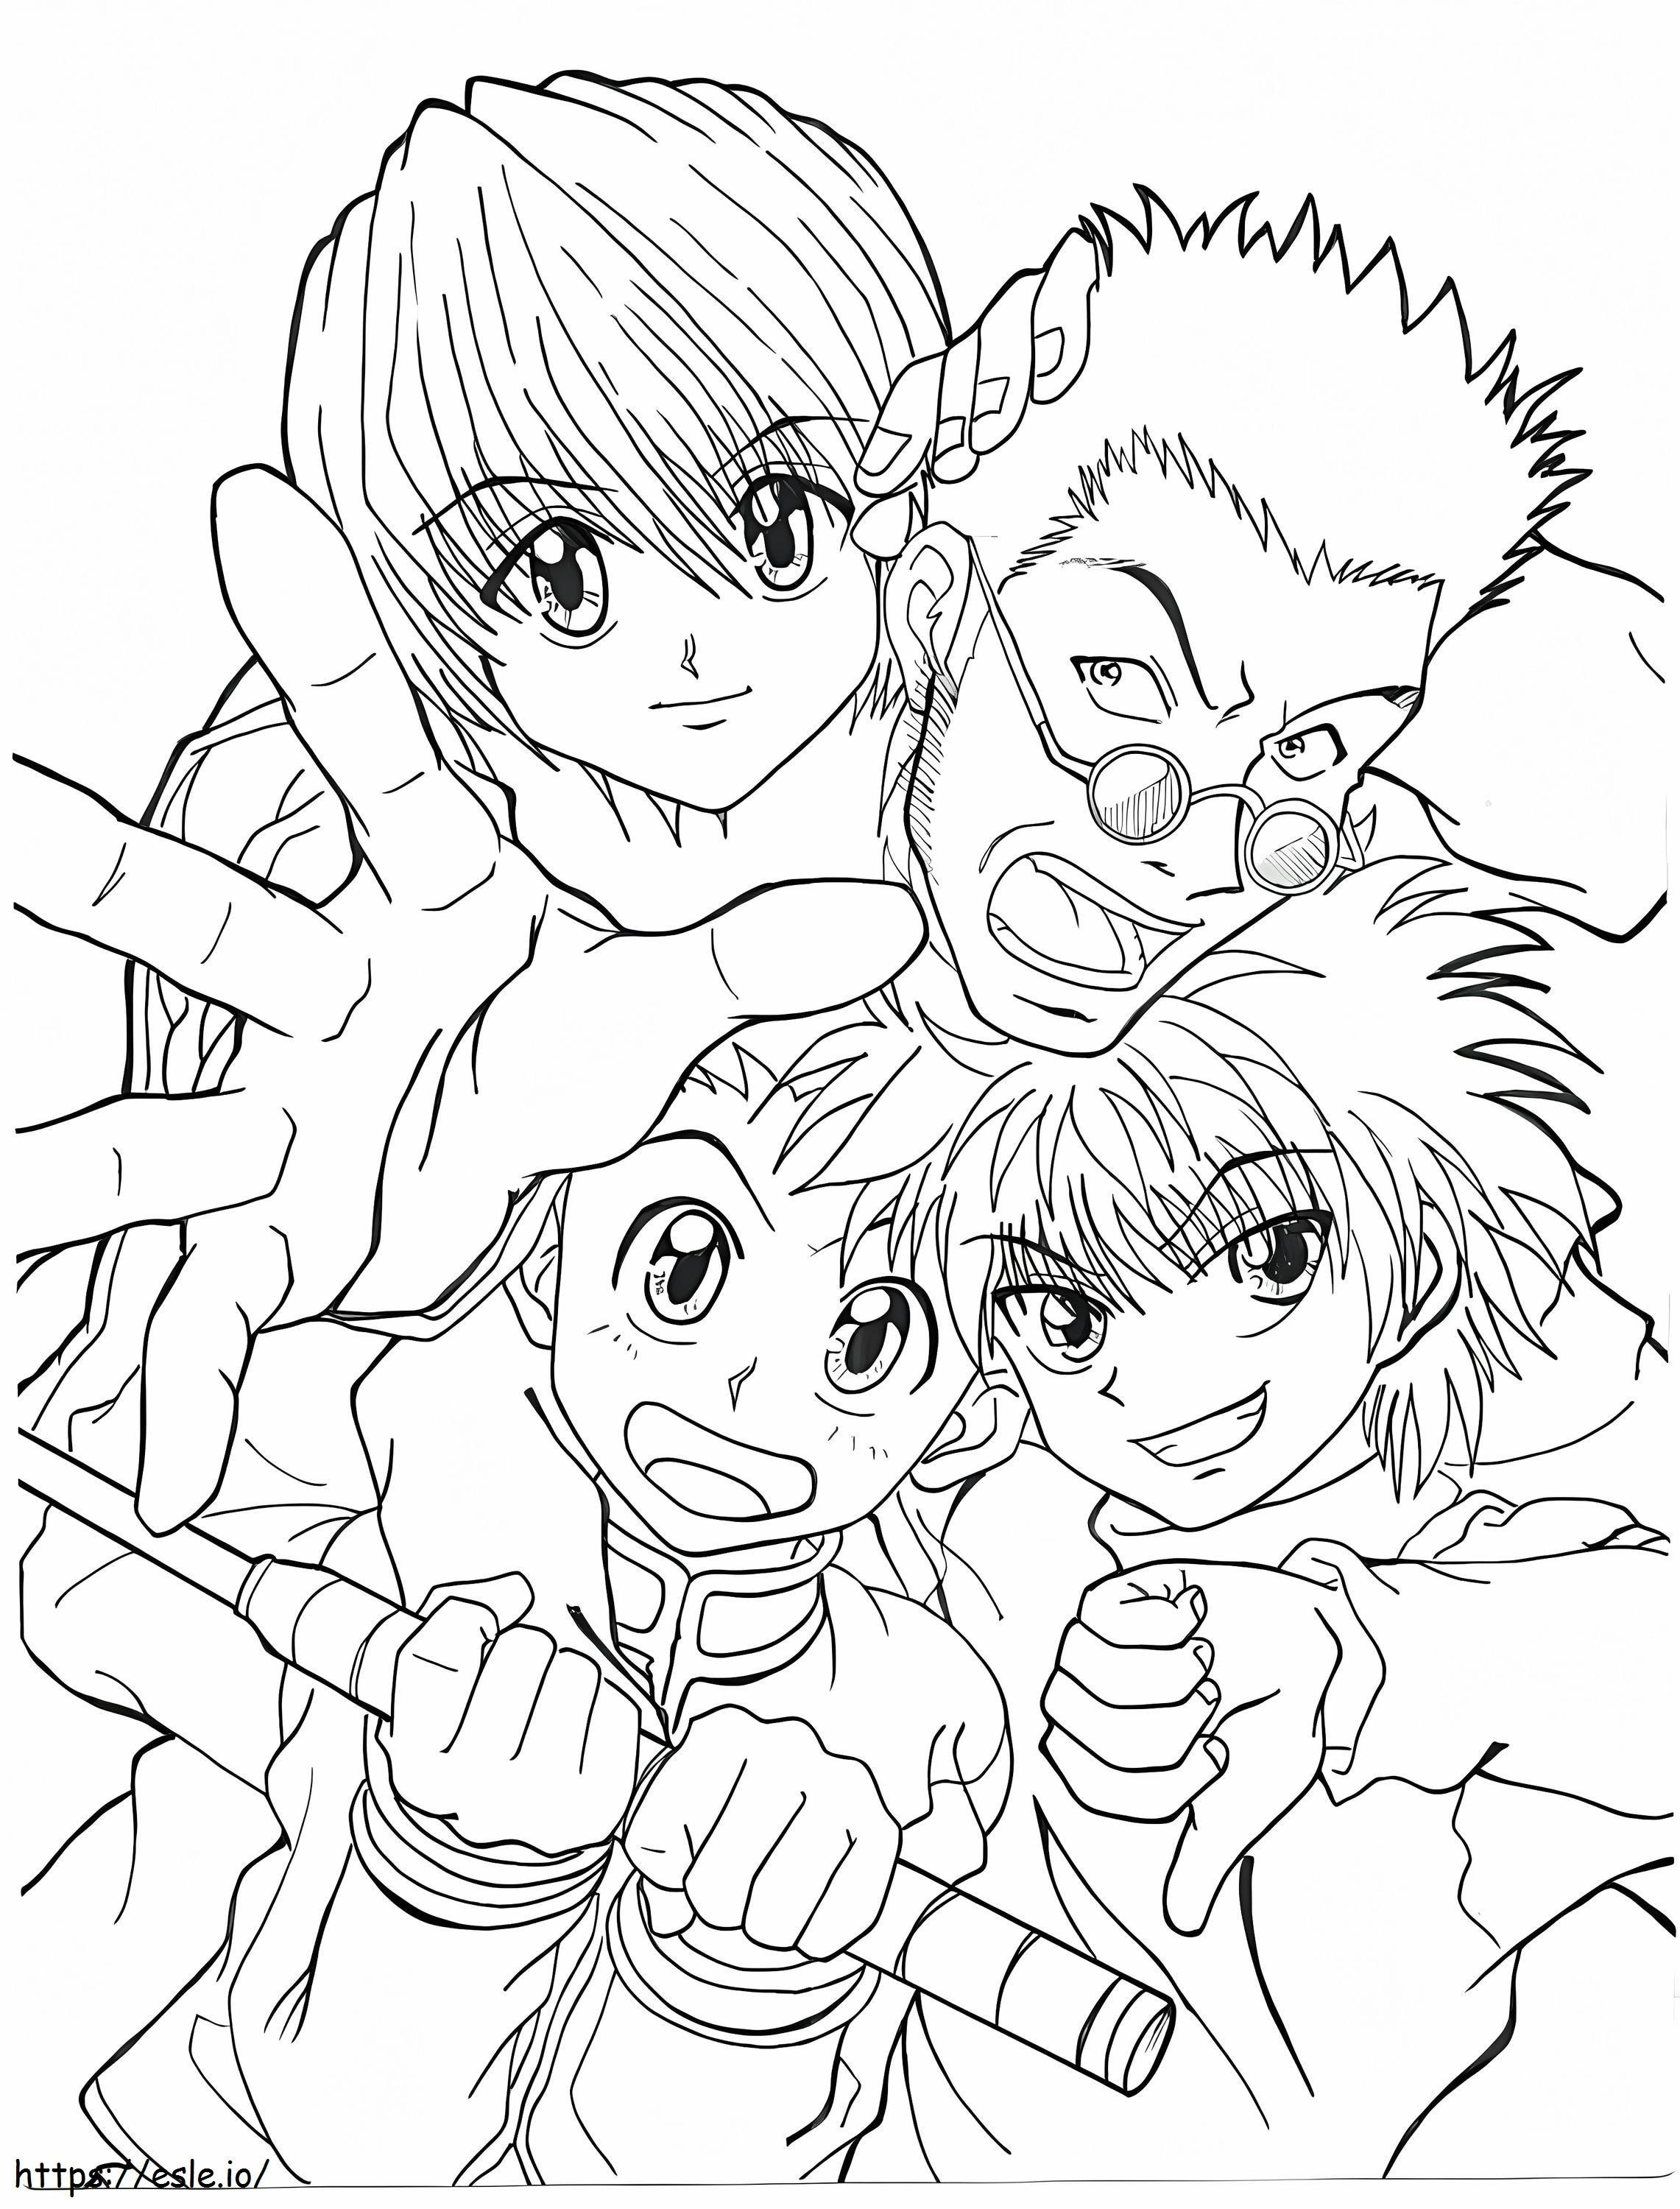 Hunter X Hunter Characters 3 coloring page